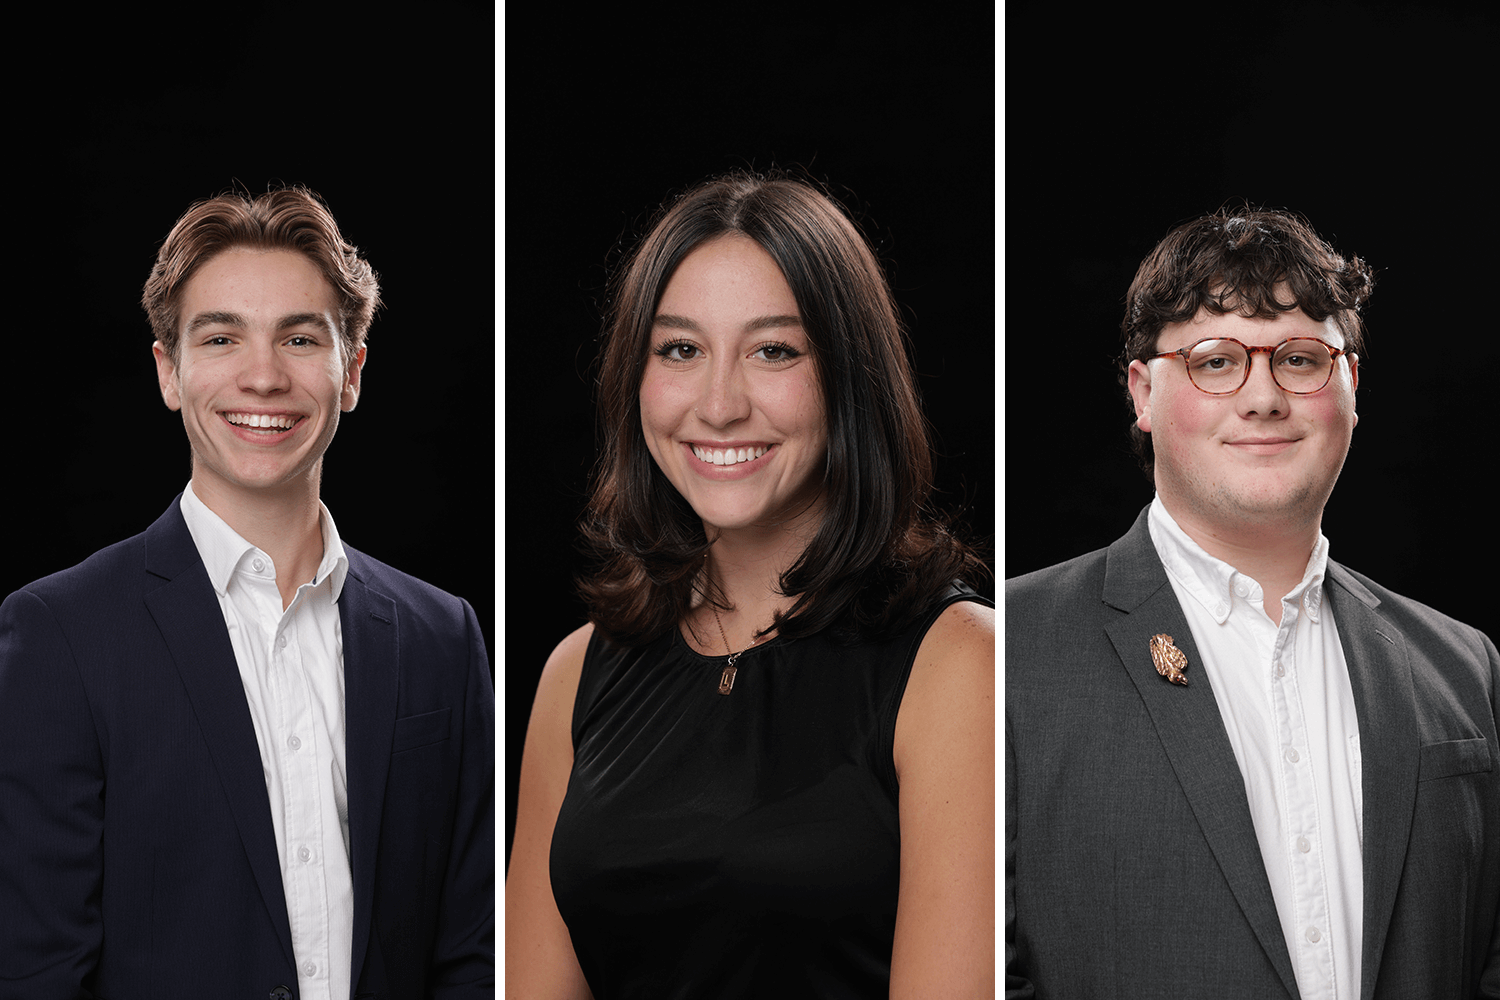 Kyle Marks, junior from Taylors, South Carolina; Lauren McCaffery, senior from Flower Mound, Texas; and Alexander Rouse, junior from Greenville, South Carolina